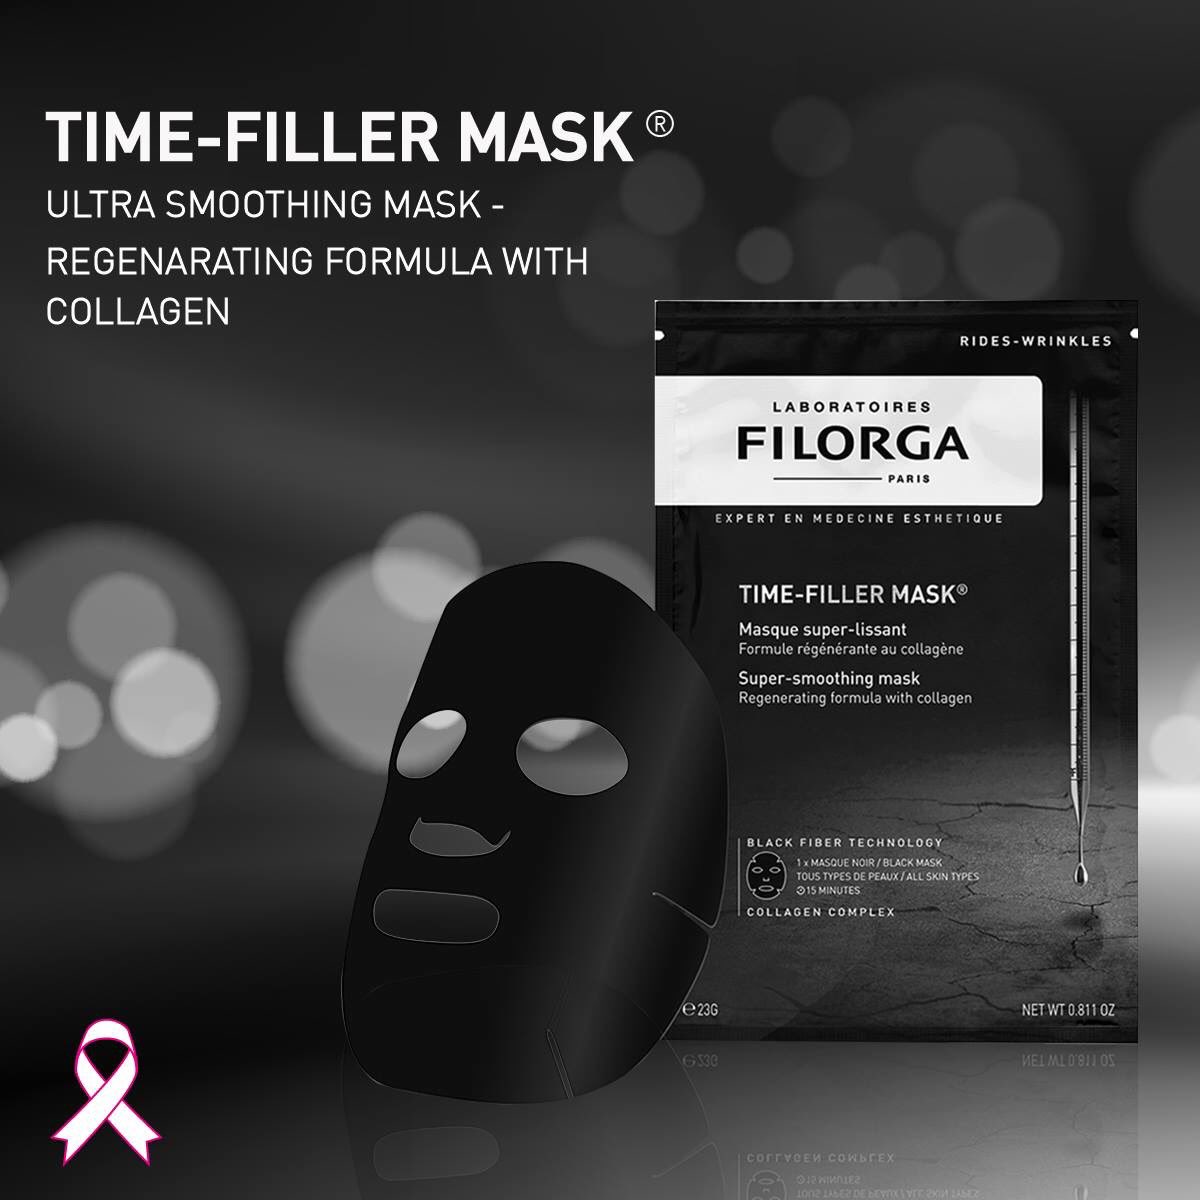 Filorga Lebanon on Twitter: "FILORGA TIME-FILLER MASK® smoothes and  regenerates from the very first application in just 15 minutes.  https://t.co/o5SmDjwsKM" / Twitter